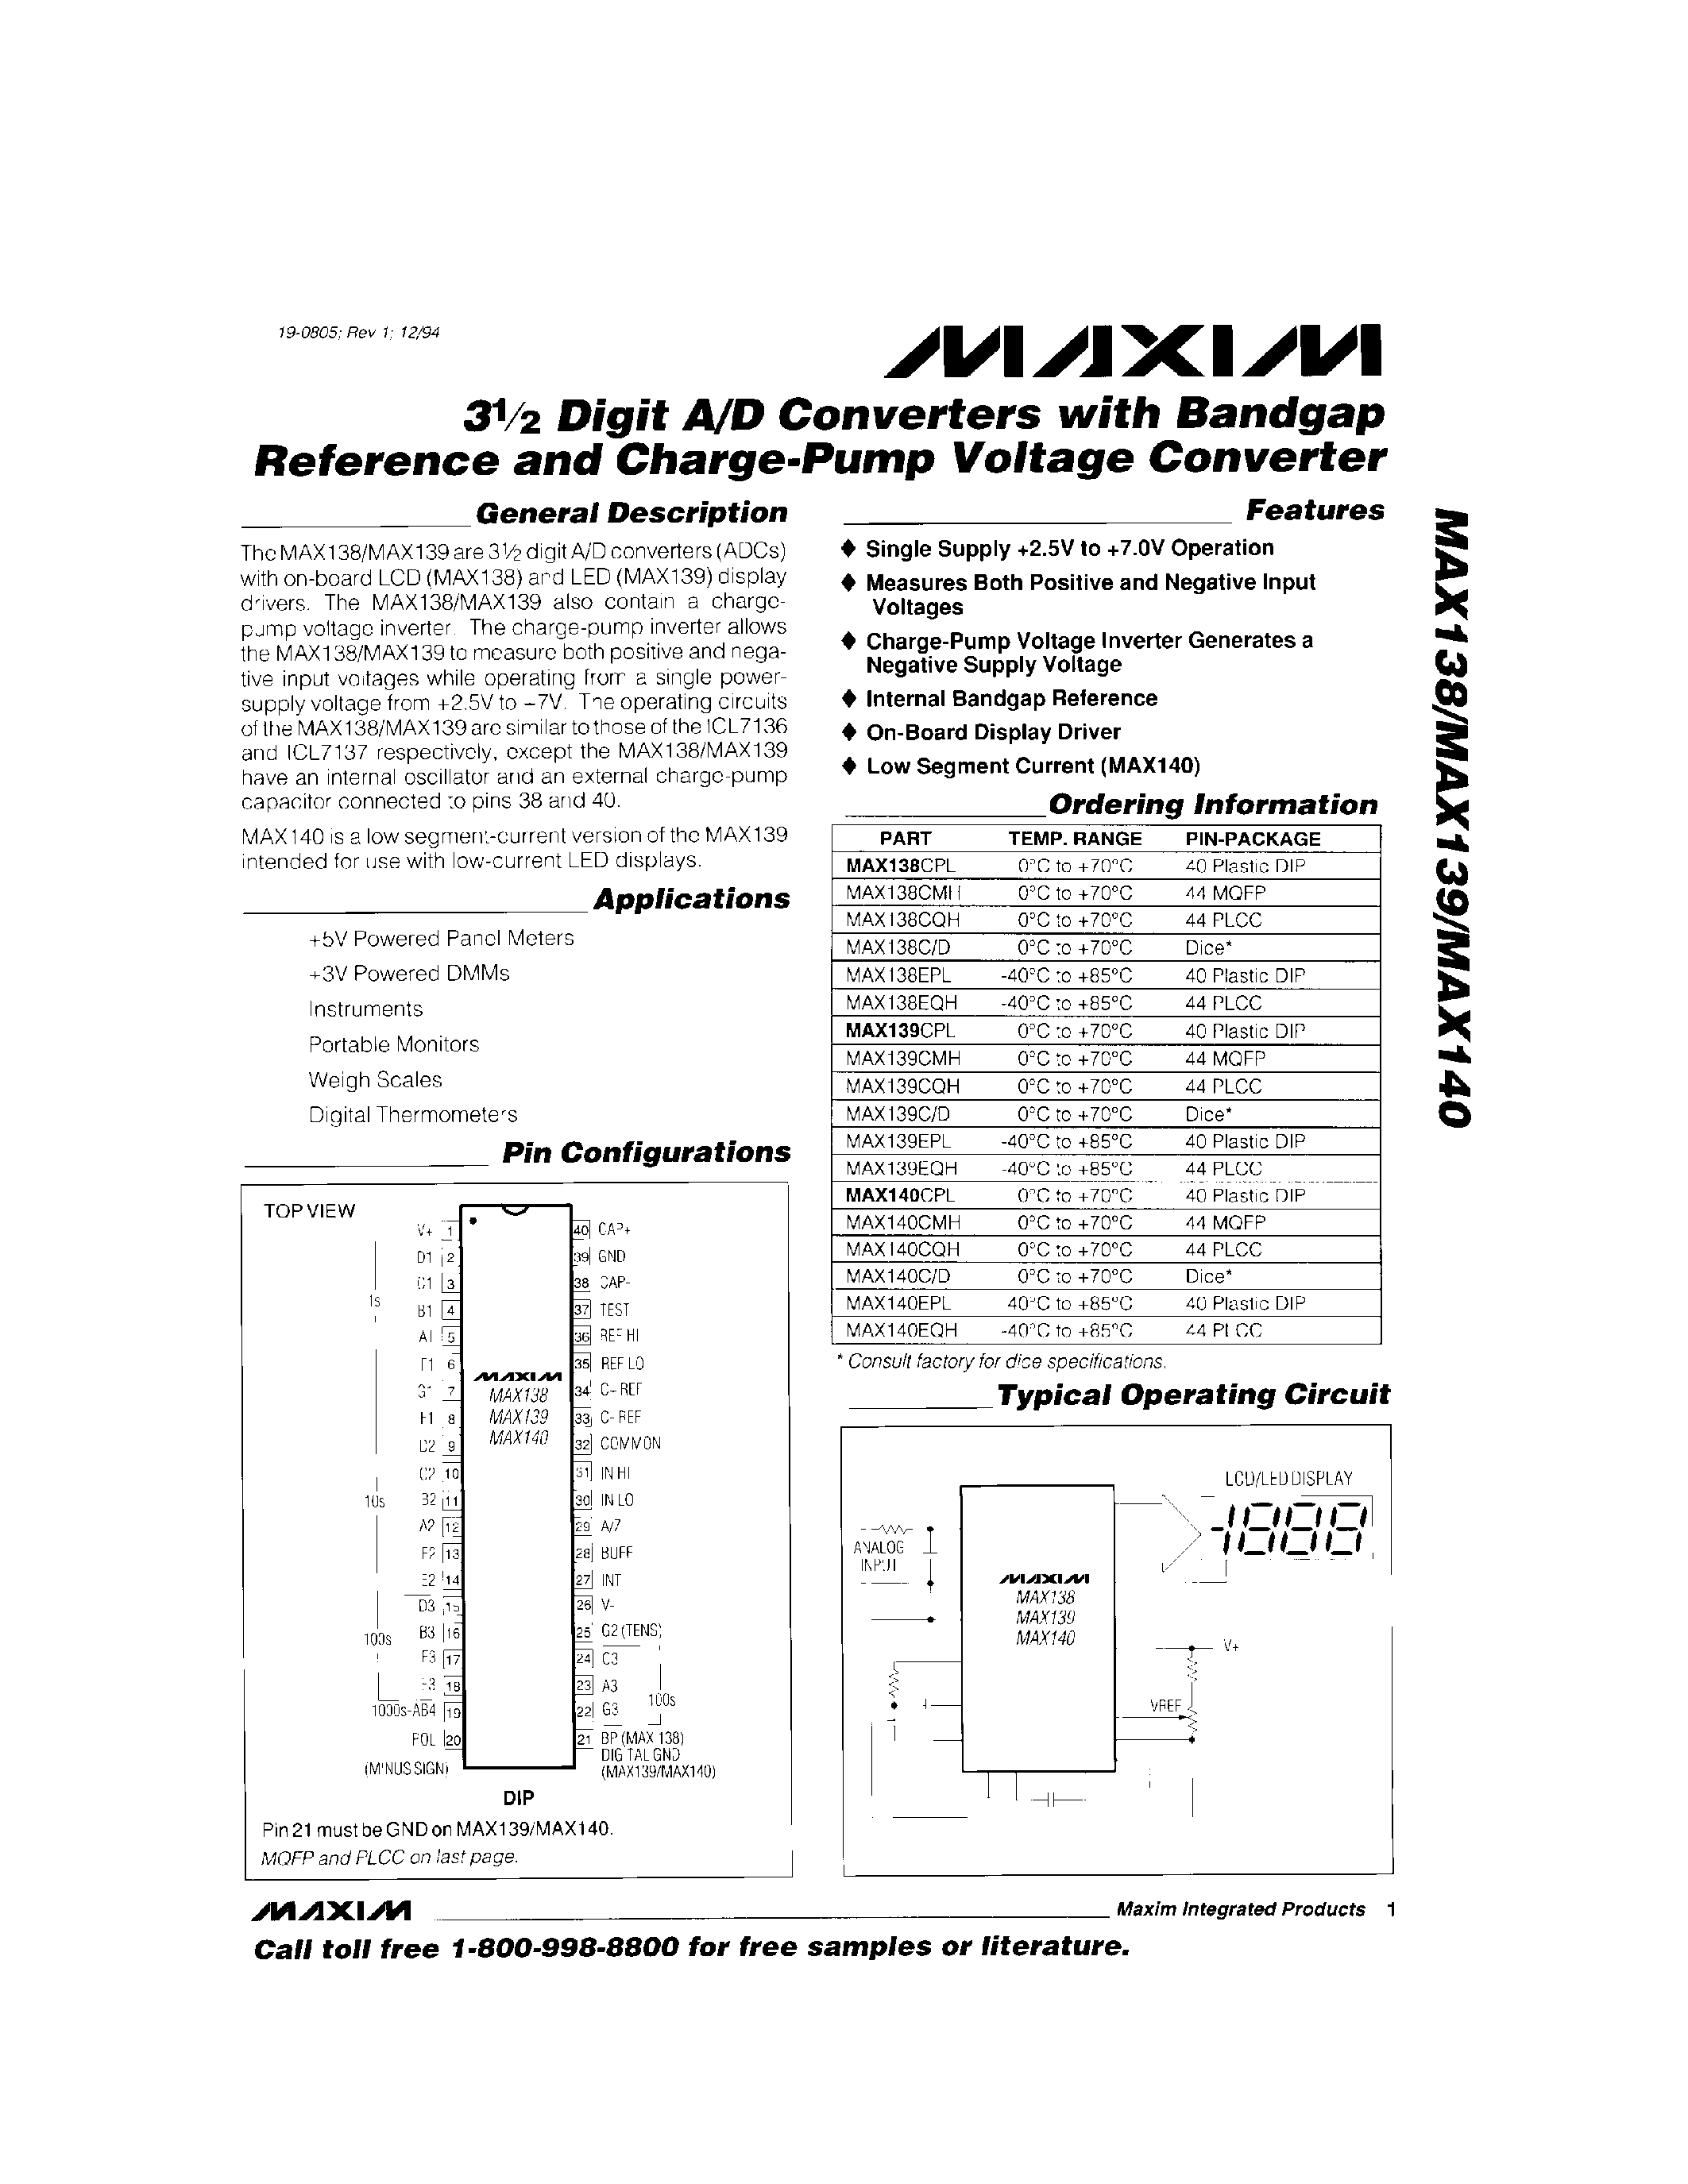 Datasheet MAX138-MAX140 - 3Digit A/D Converters with Bandgap Refrence and Charge-Pump Voltage Converter page 1